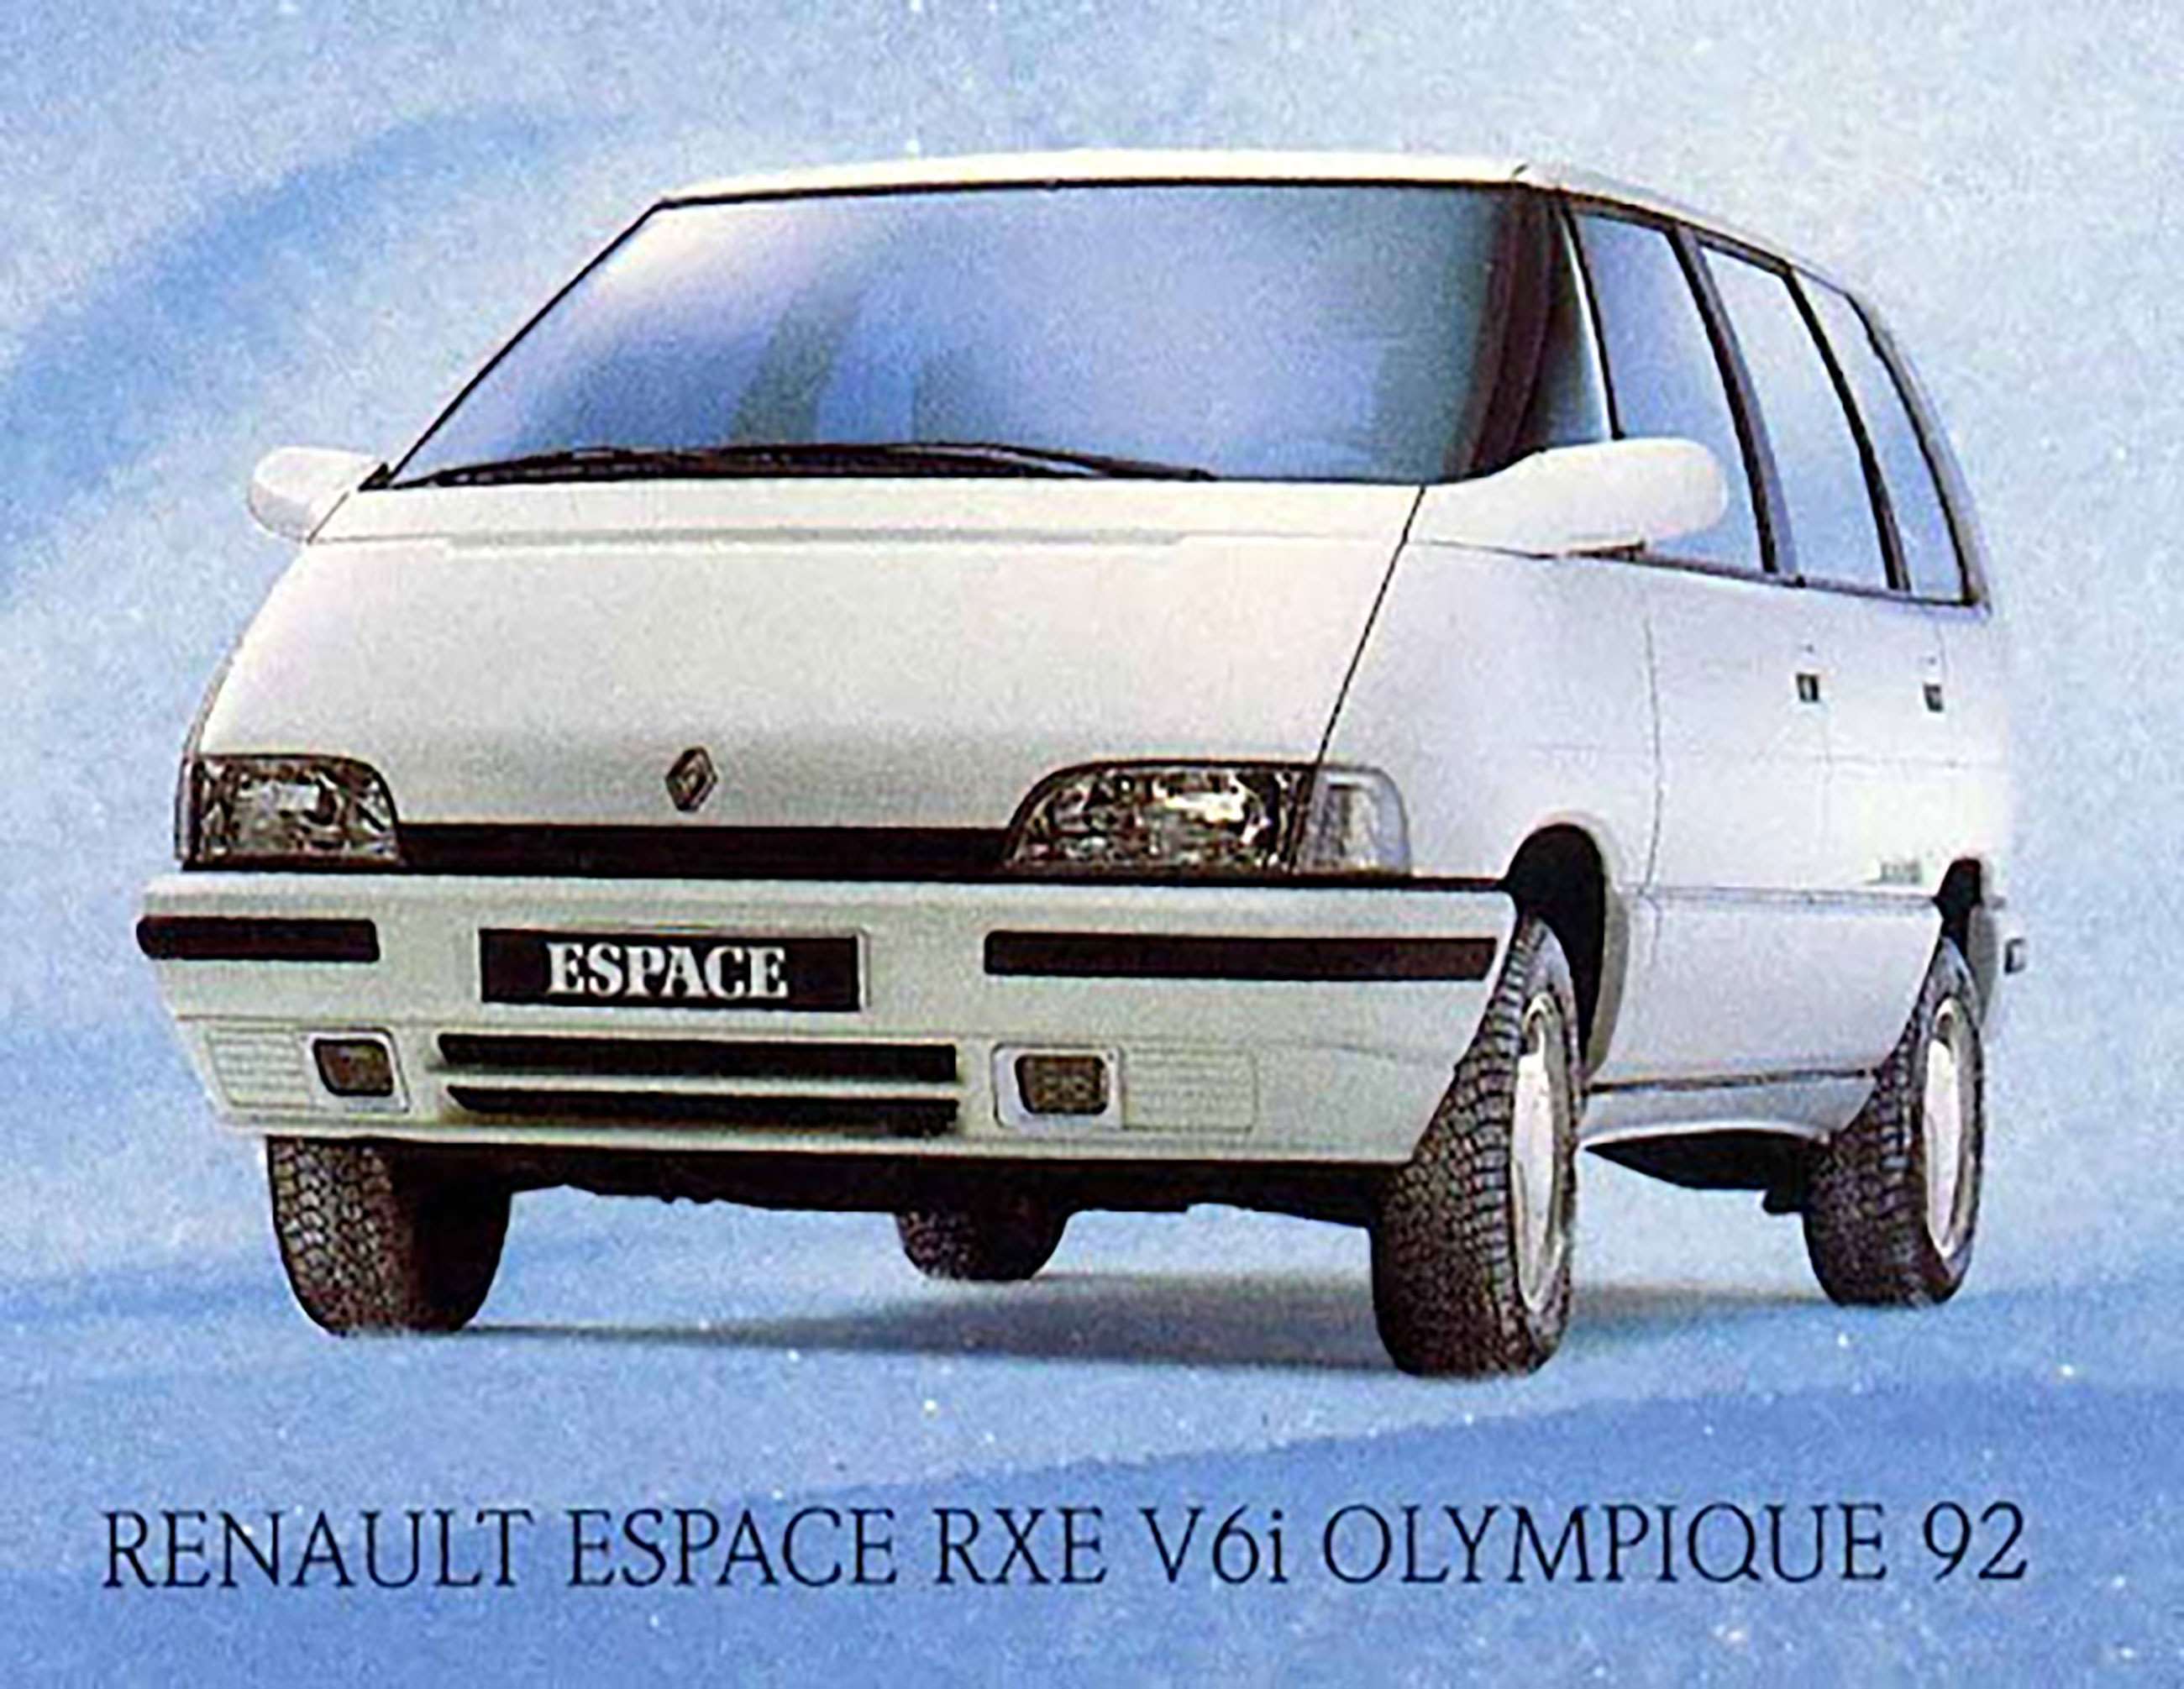 olympic-themed-cars-10-renault-espace-v6-olympique-92-albertville-edition-goodwood-13082021.jpg